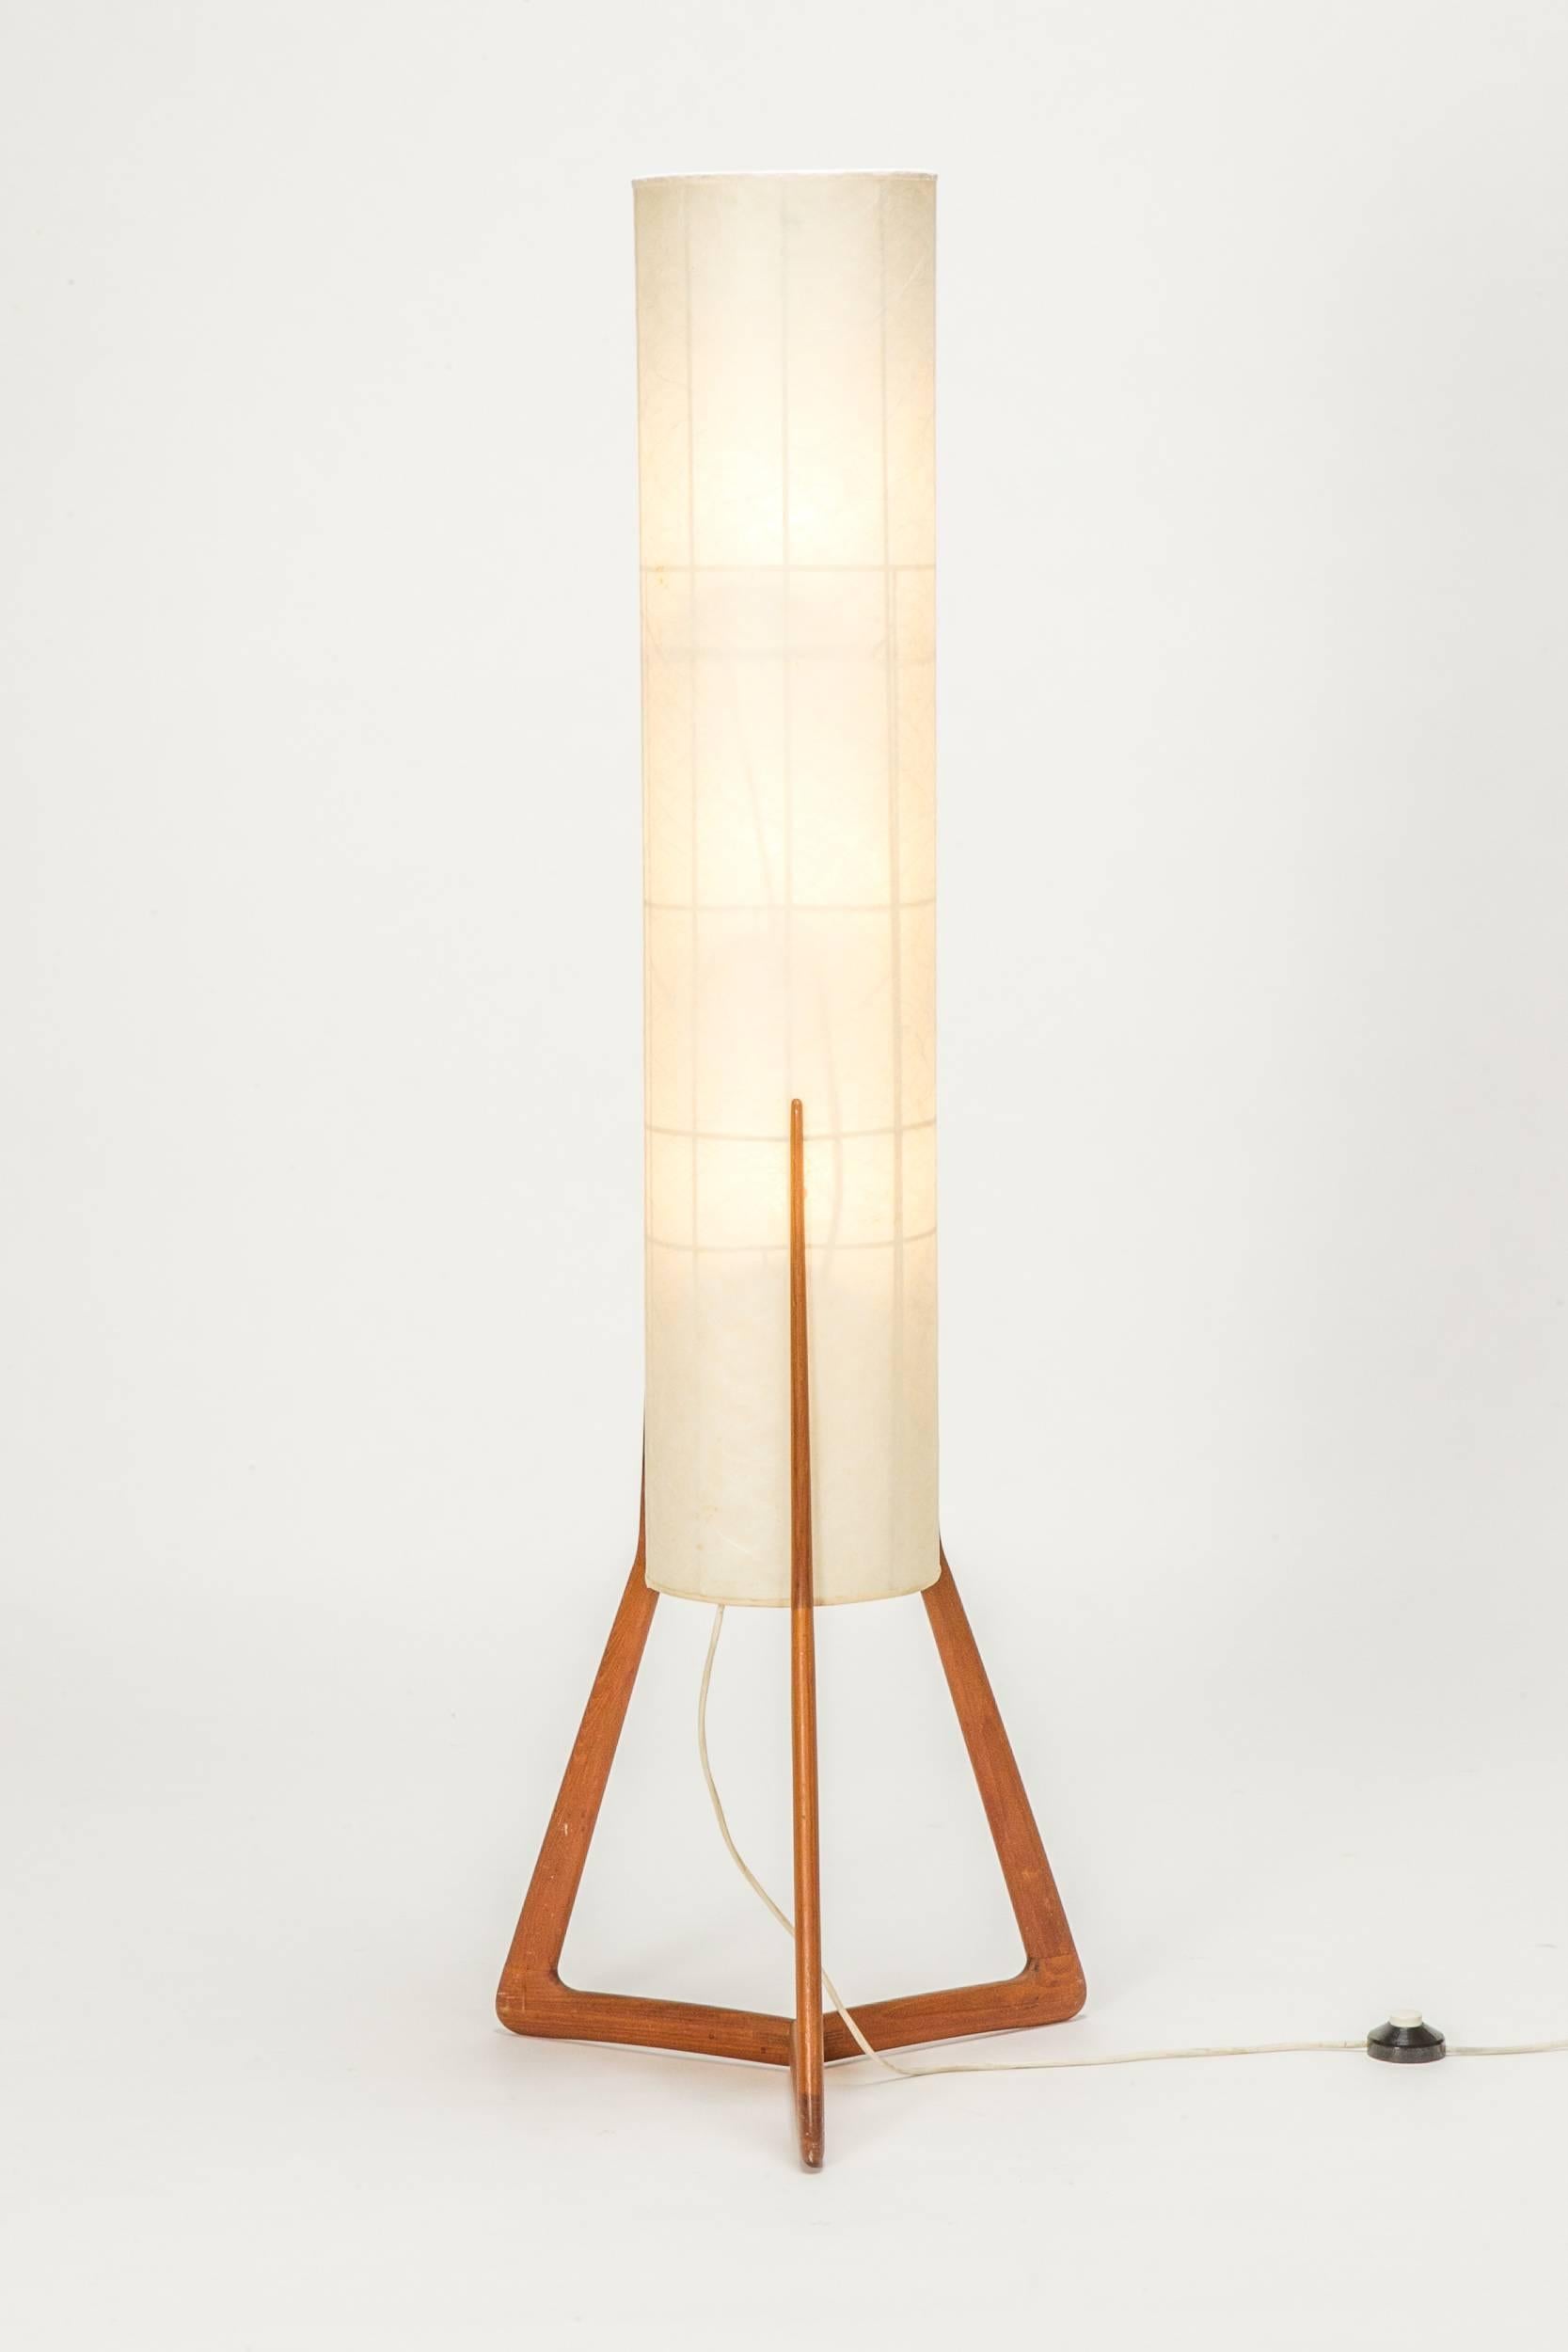 A stunning sculptural teak floor lamp, manufactured in Denmark in the 1960s. High quality craftsmanship with wonderful details, original paper lampshade was slightly restored, foot switch.
Measures: Diameter shade 22.5cm.
Diameter base 47cm.